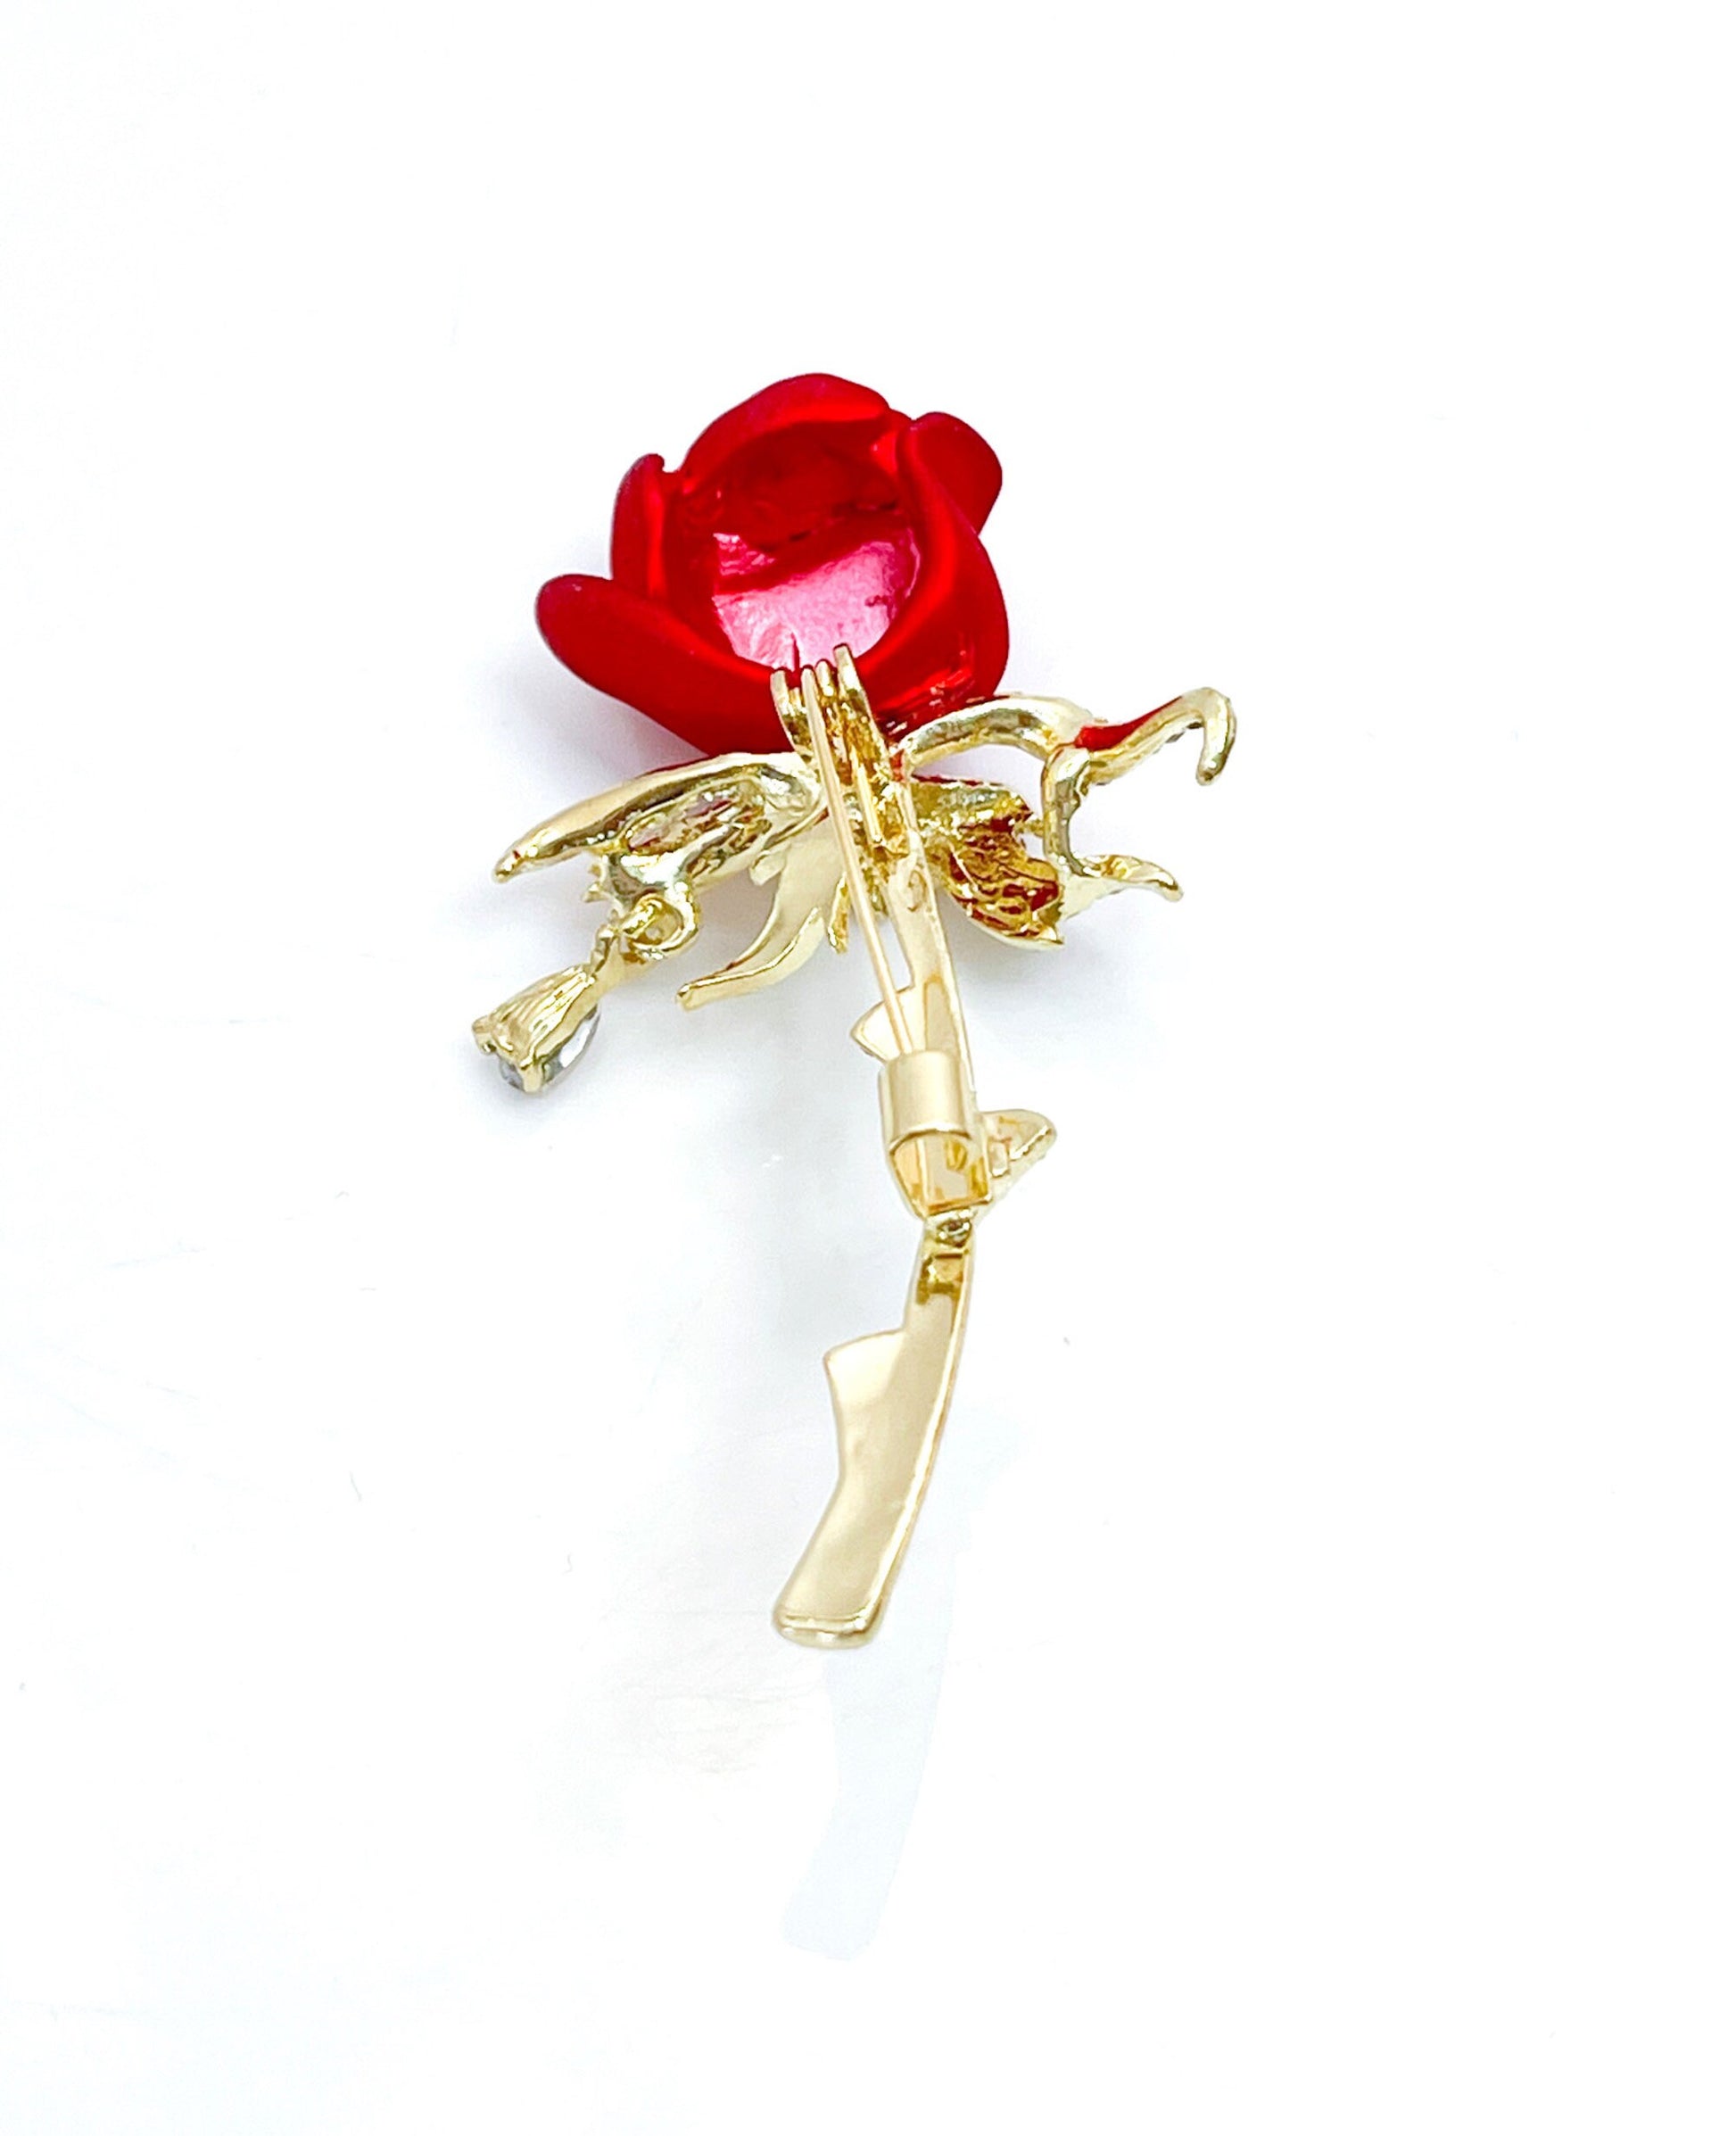 Pretty Single Red Rose Brooch | Red Gold Rose with Crystal Teardrop | Flower Jacket Pin